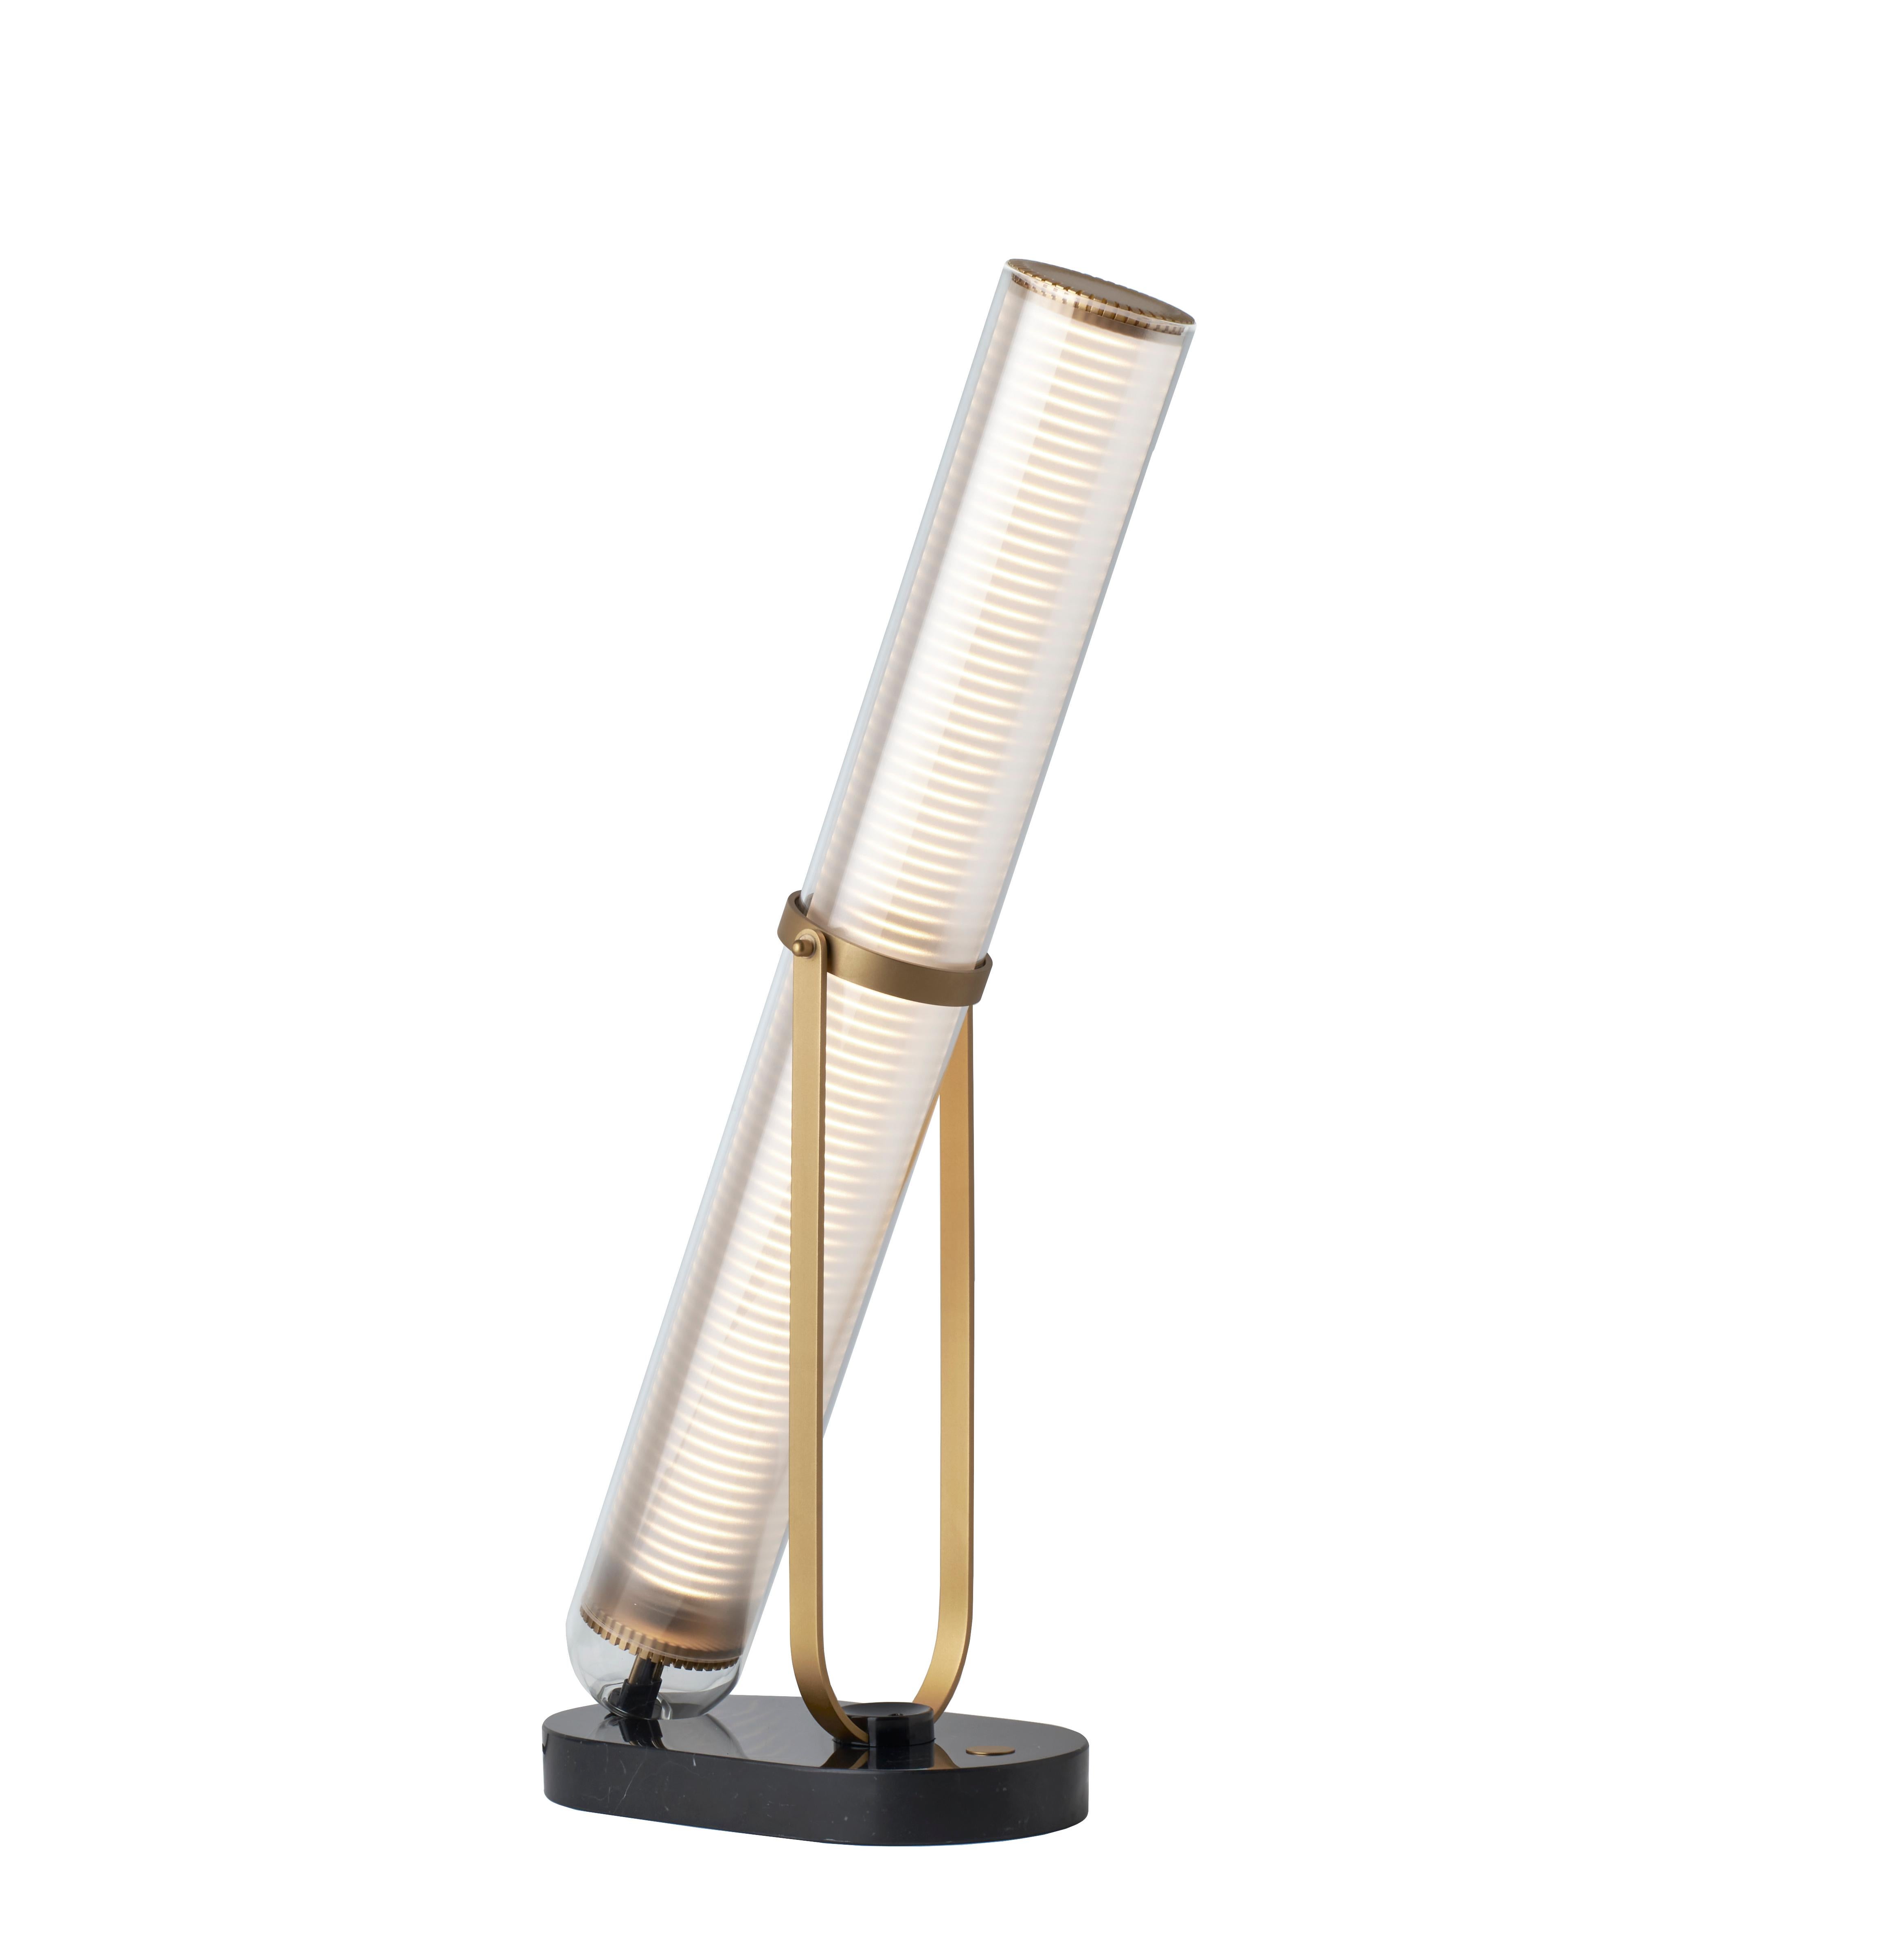 DCW Editions La Lampe Frechin Table Lamp in Gold Black by Jean-Louis Frechin
 
 La Lampe Frechin is a table and floor lamp composed of a base in black marble and anodized aluminum, and a borosilicate tube. By confronting timeless material with a